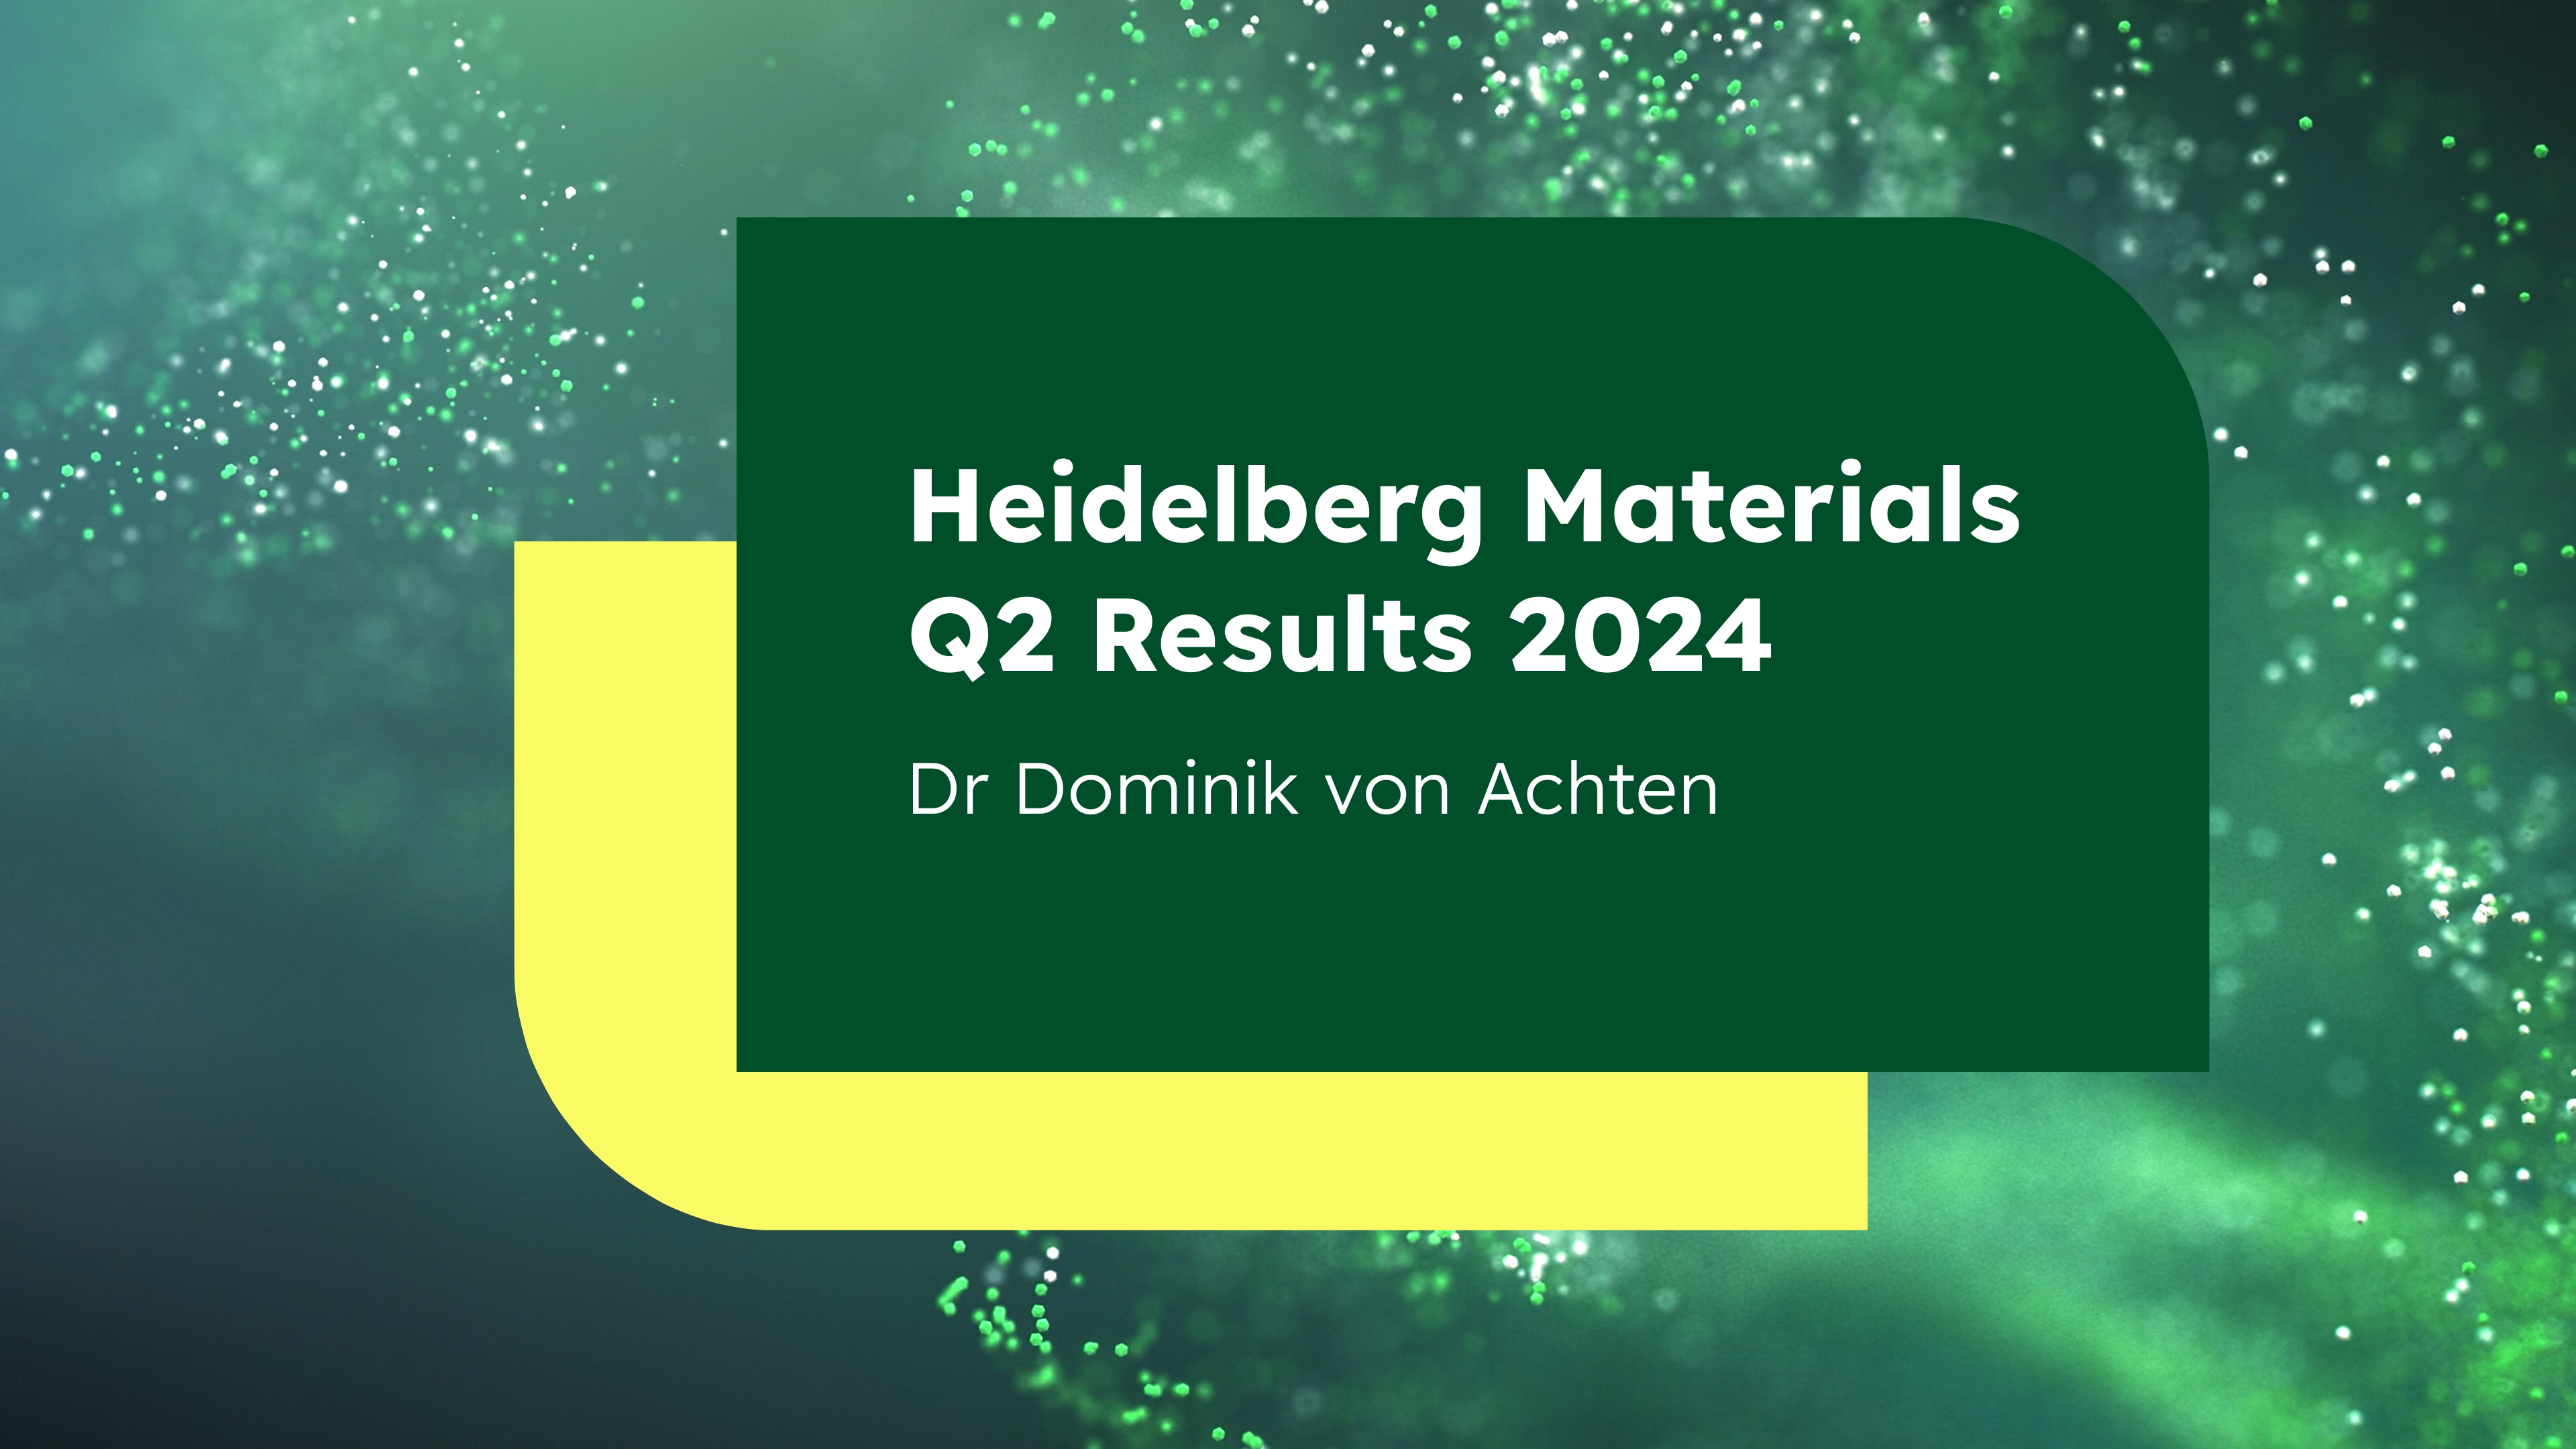 A graphic in green and yellow presents “Heidelberg Materials Q2 Results 2024” and the name “Dr. Dominik von Achten”